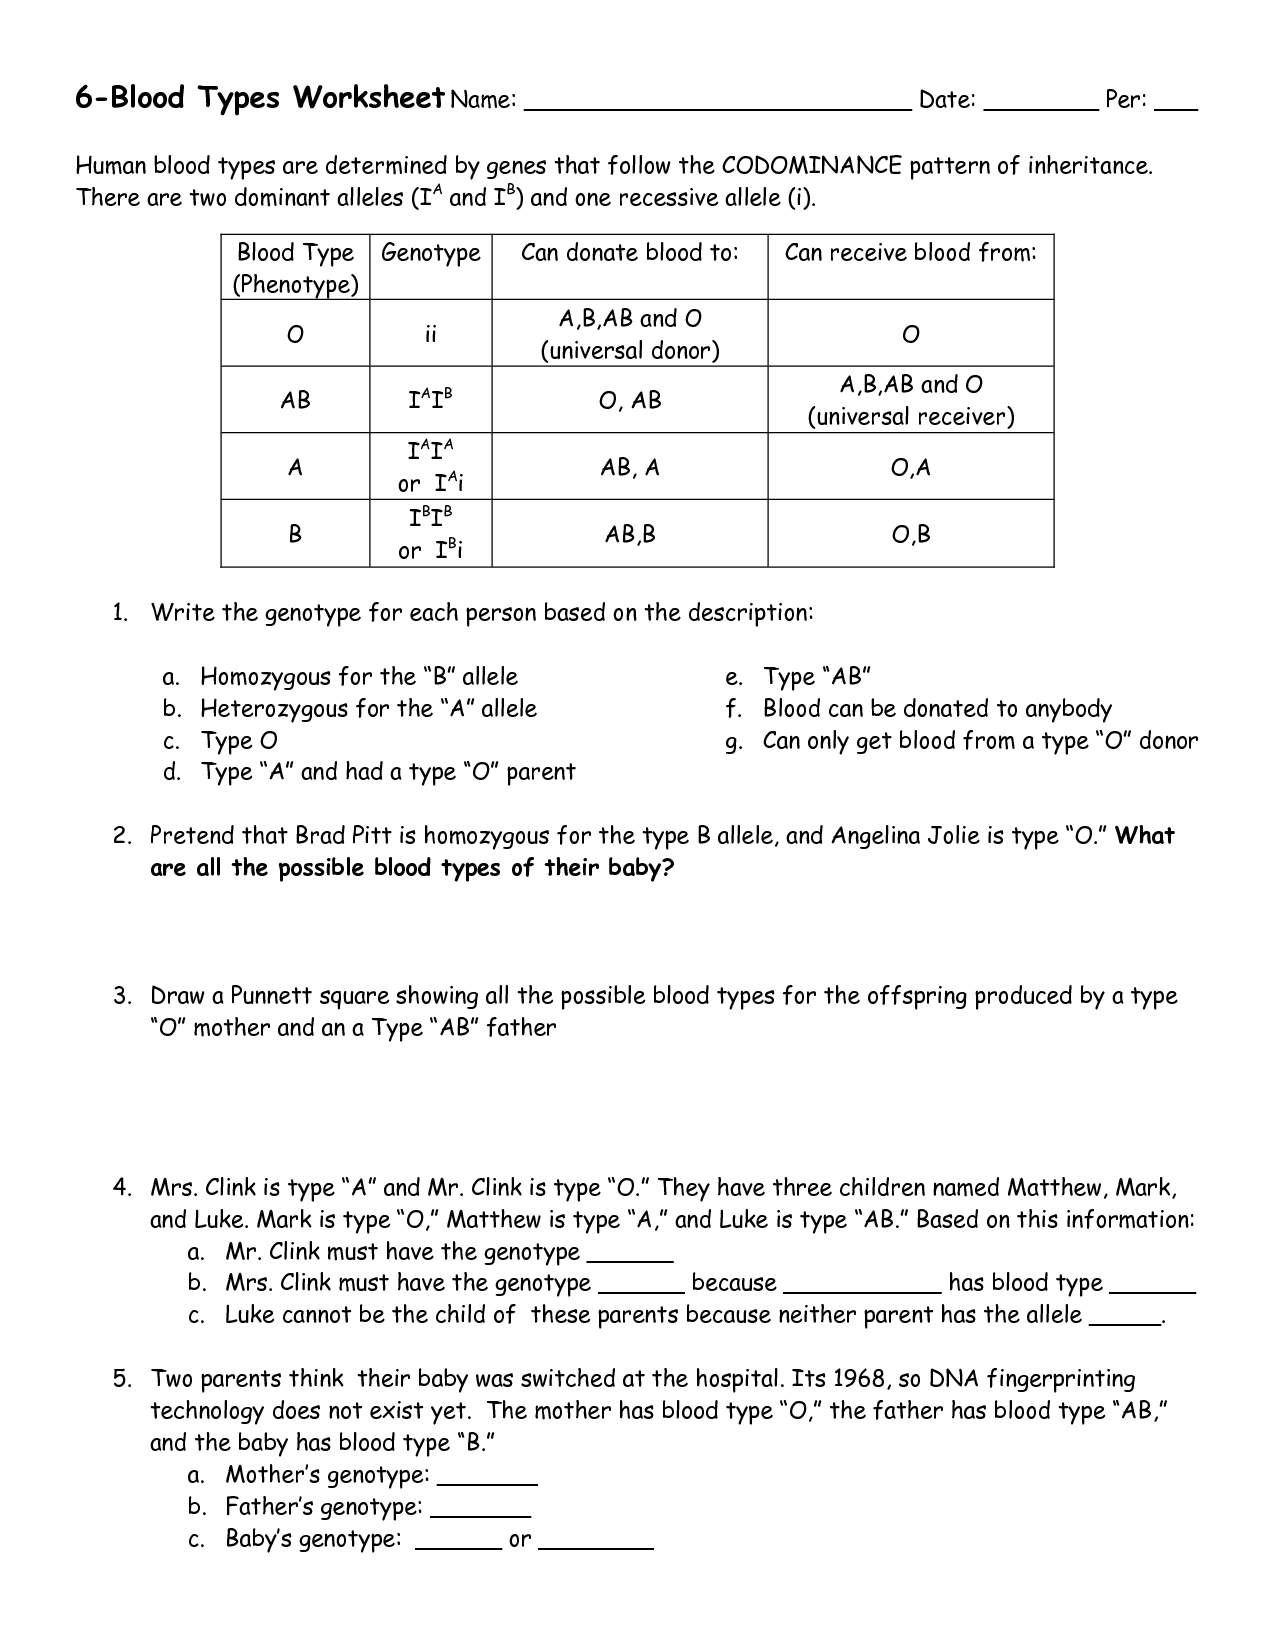 16-best-images-of-blood-type-worksheet-answer-key-codominance